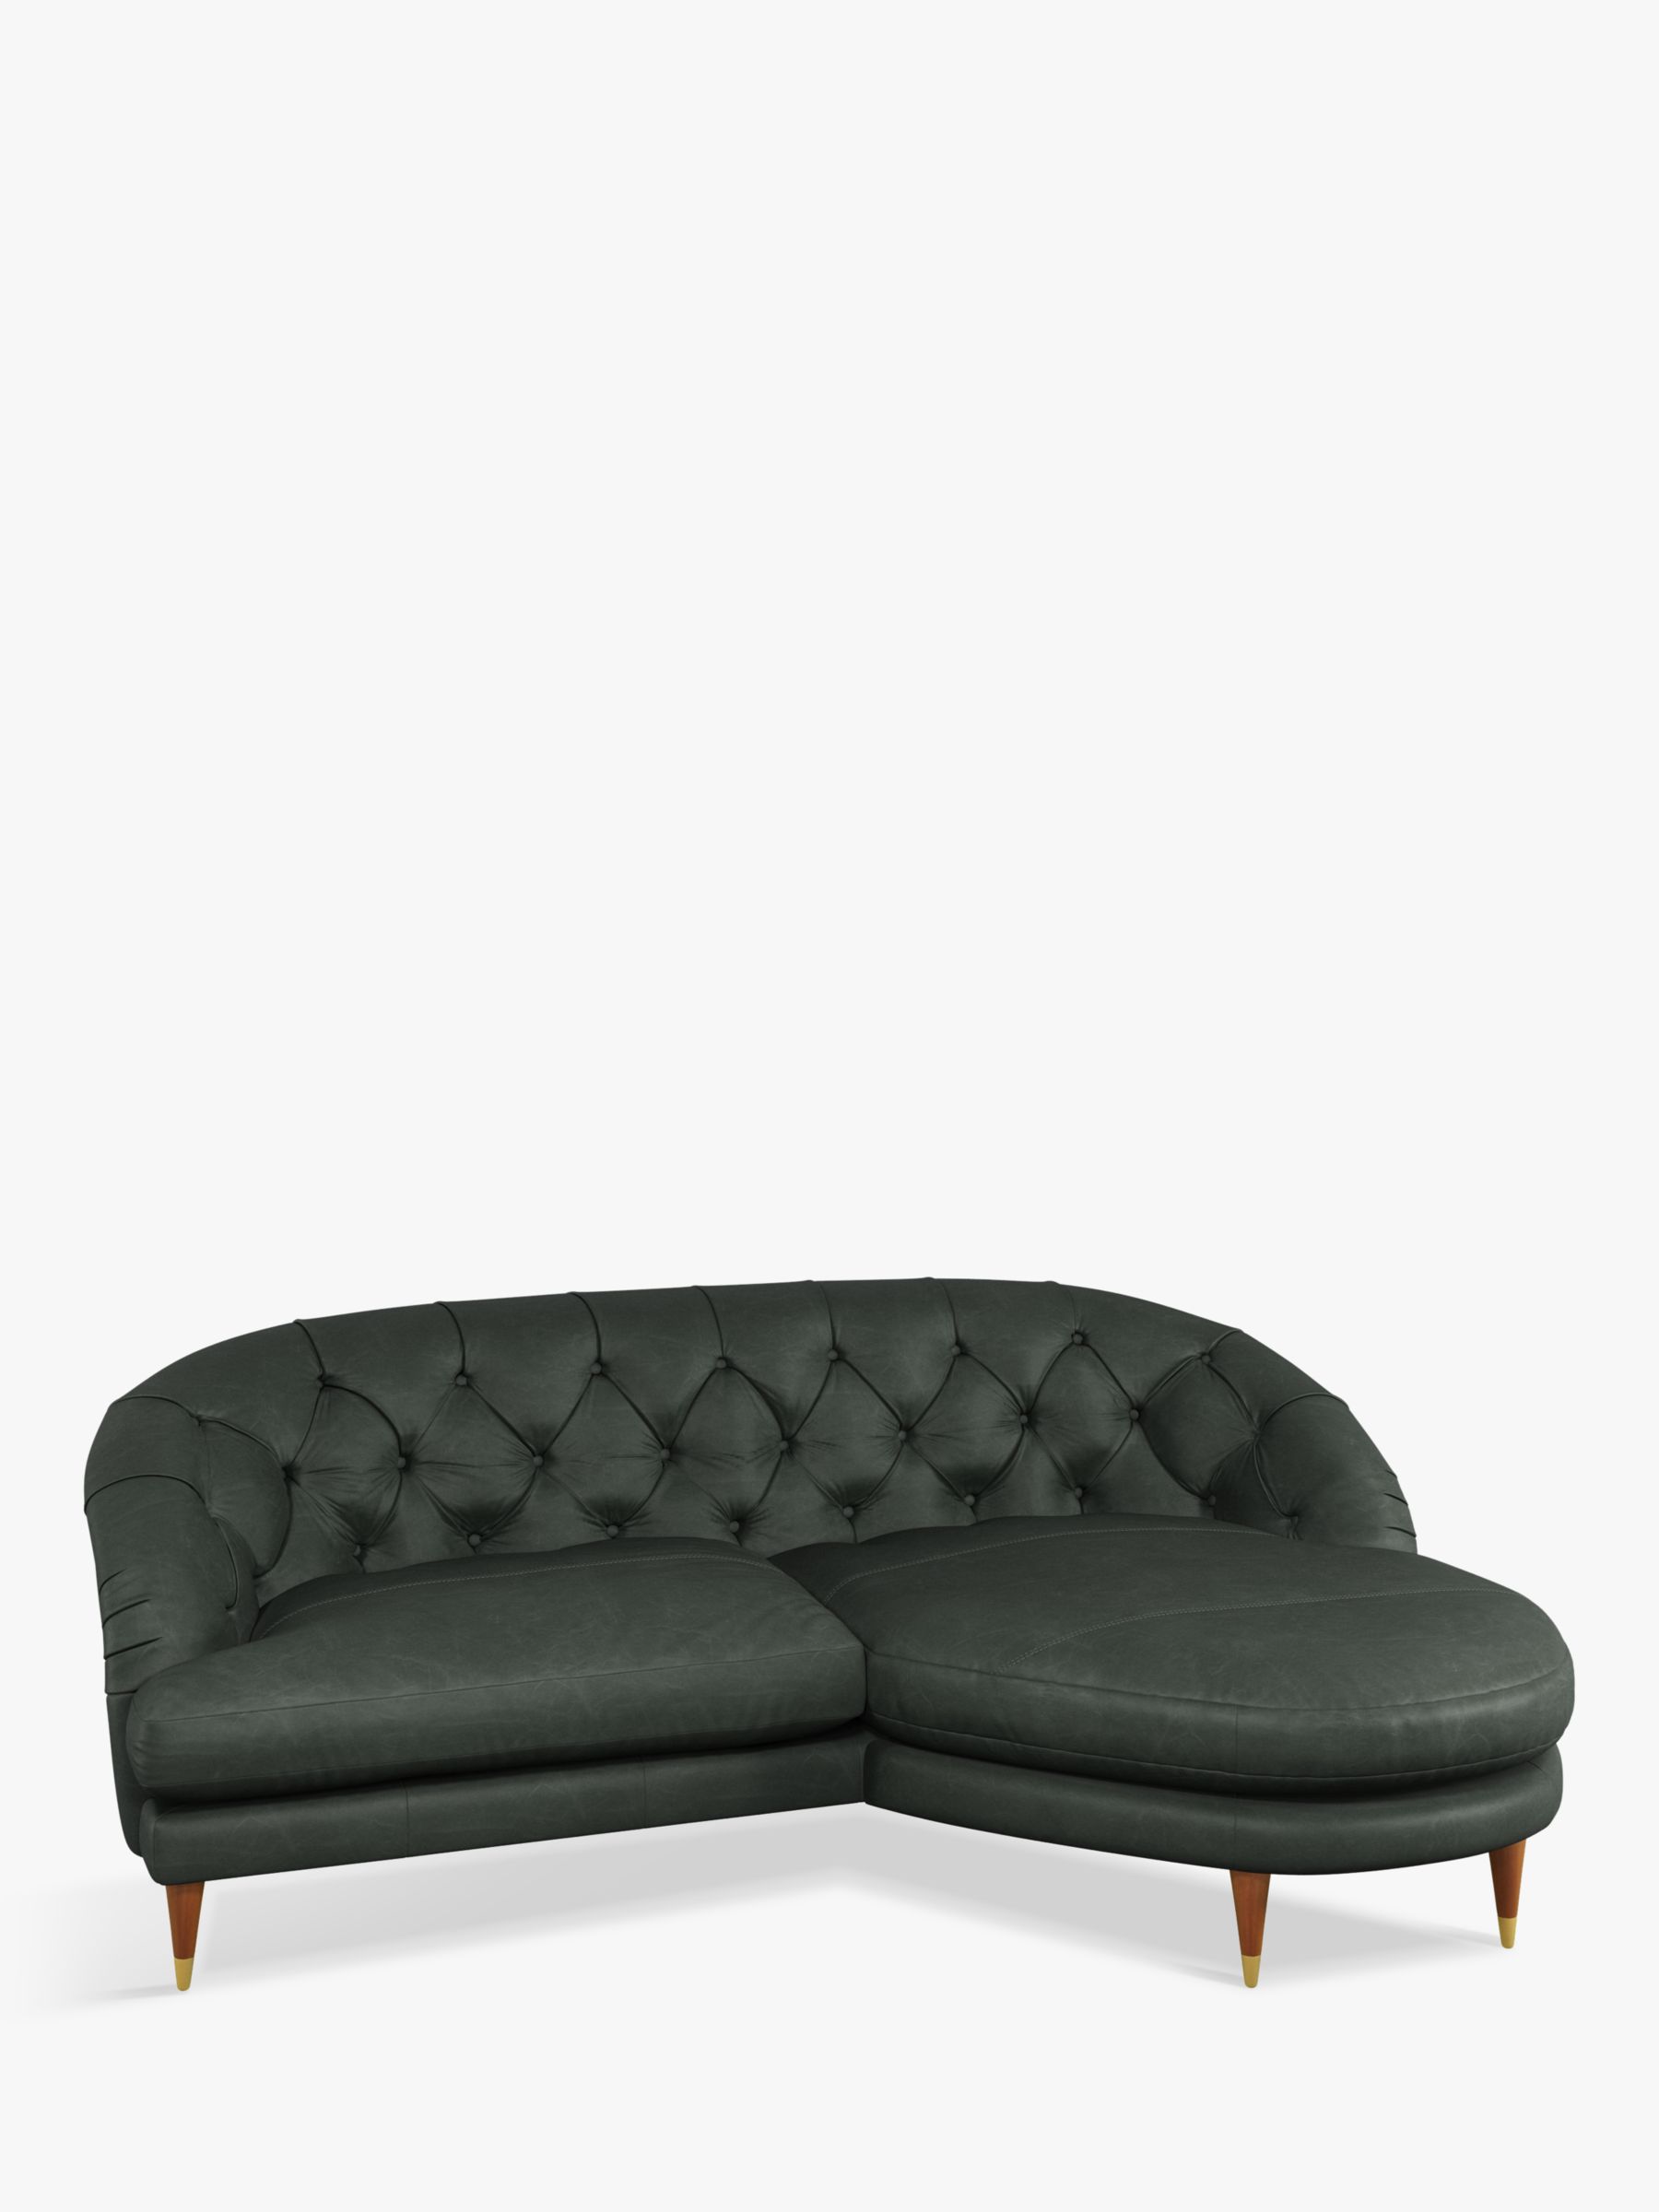 Photo of John lewis + swoon radley chaise end leather sofa